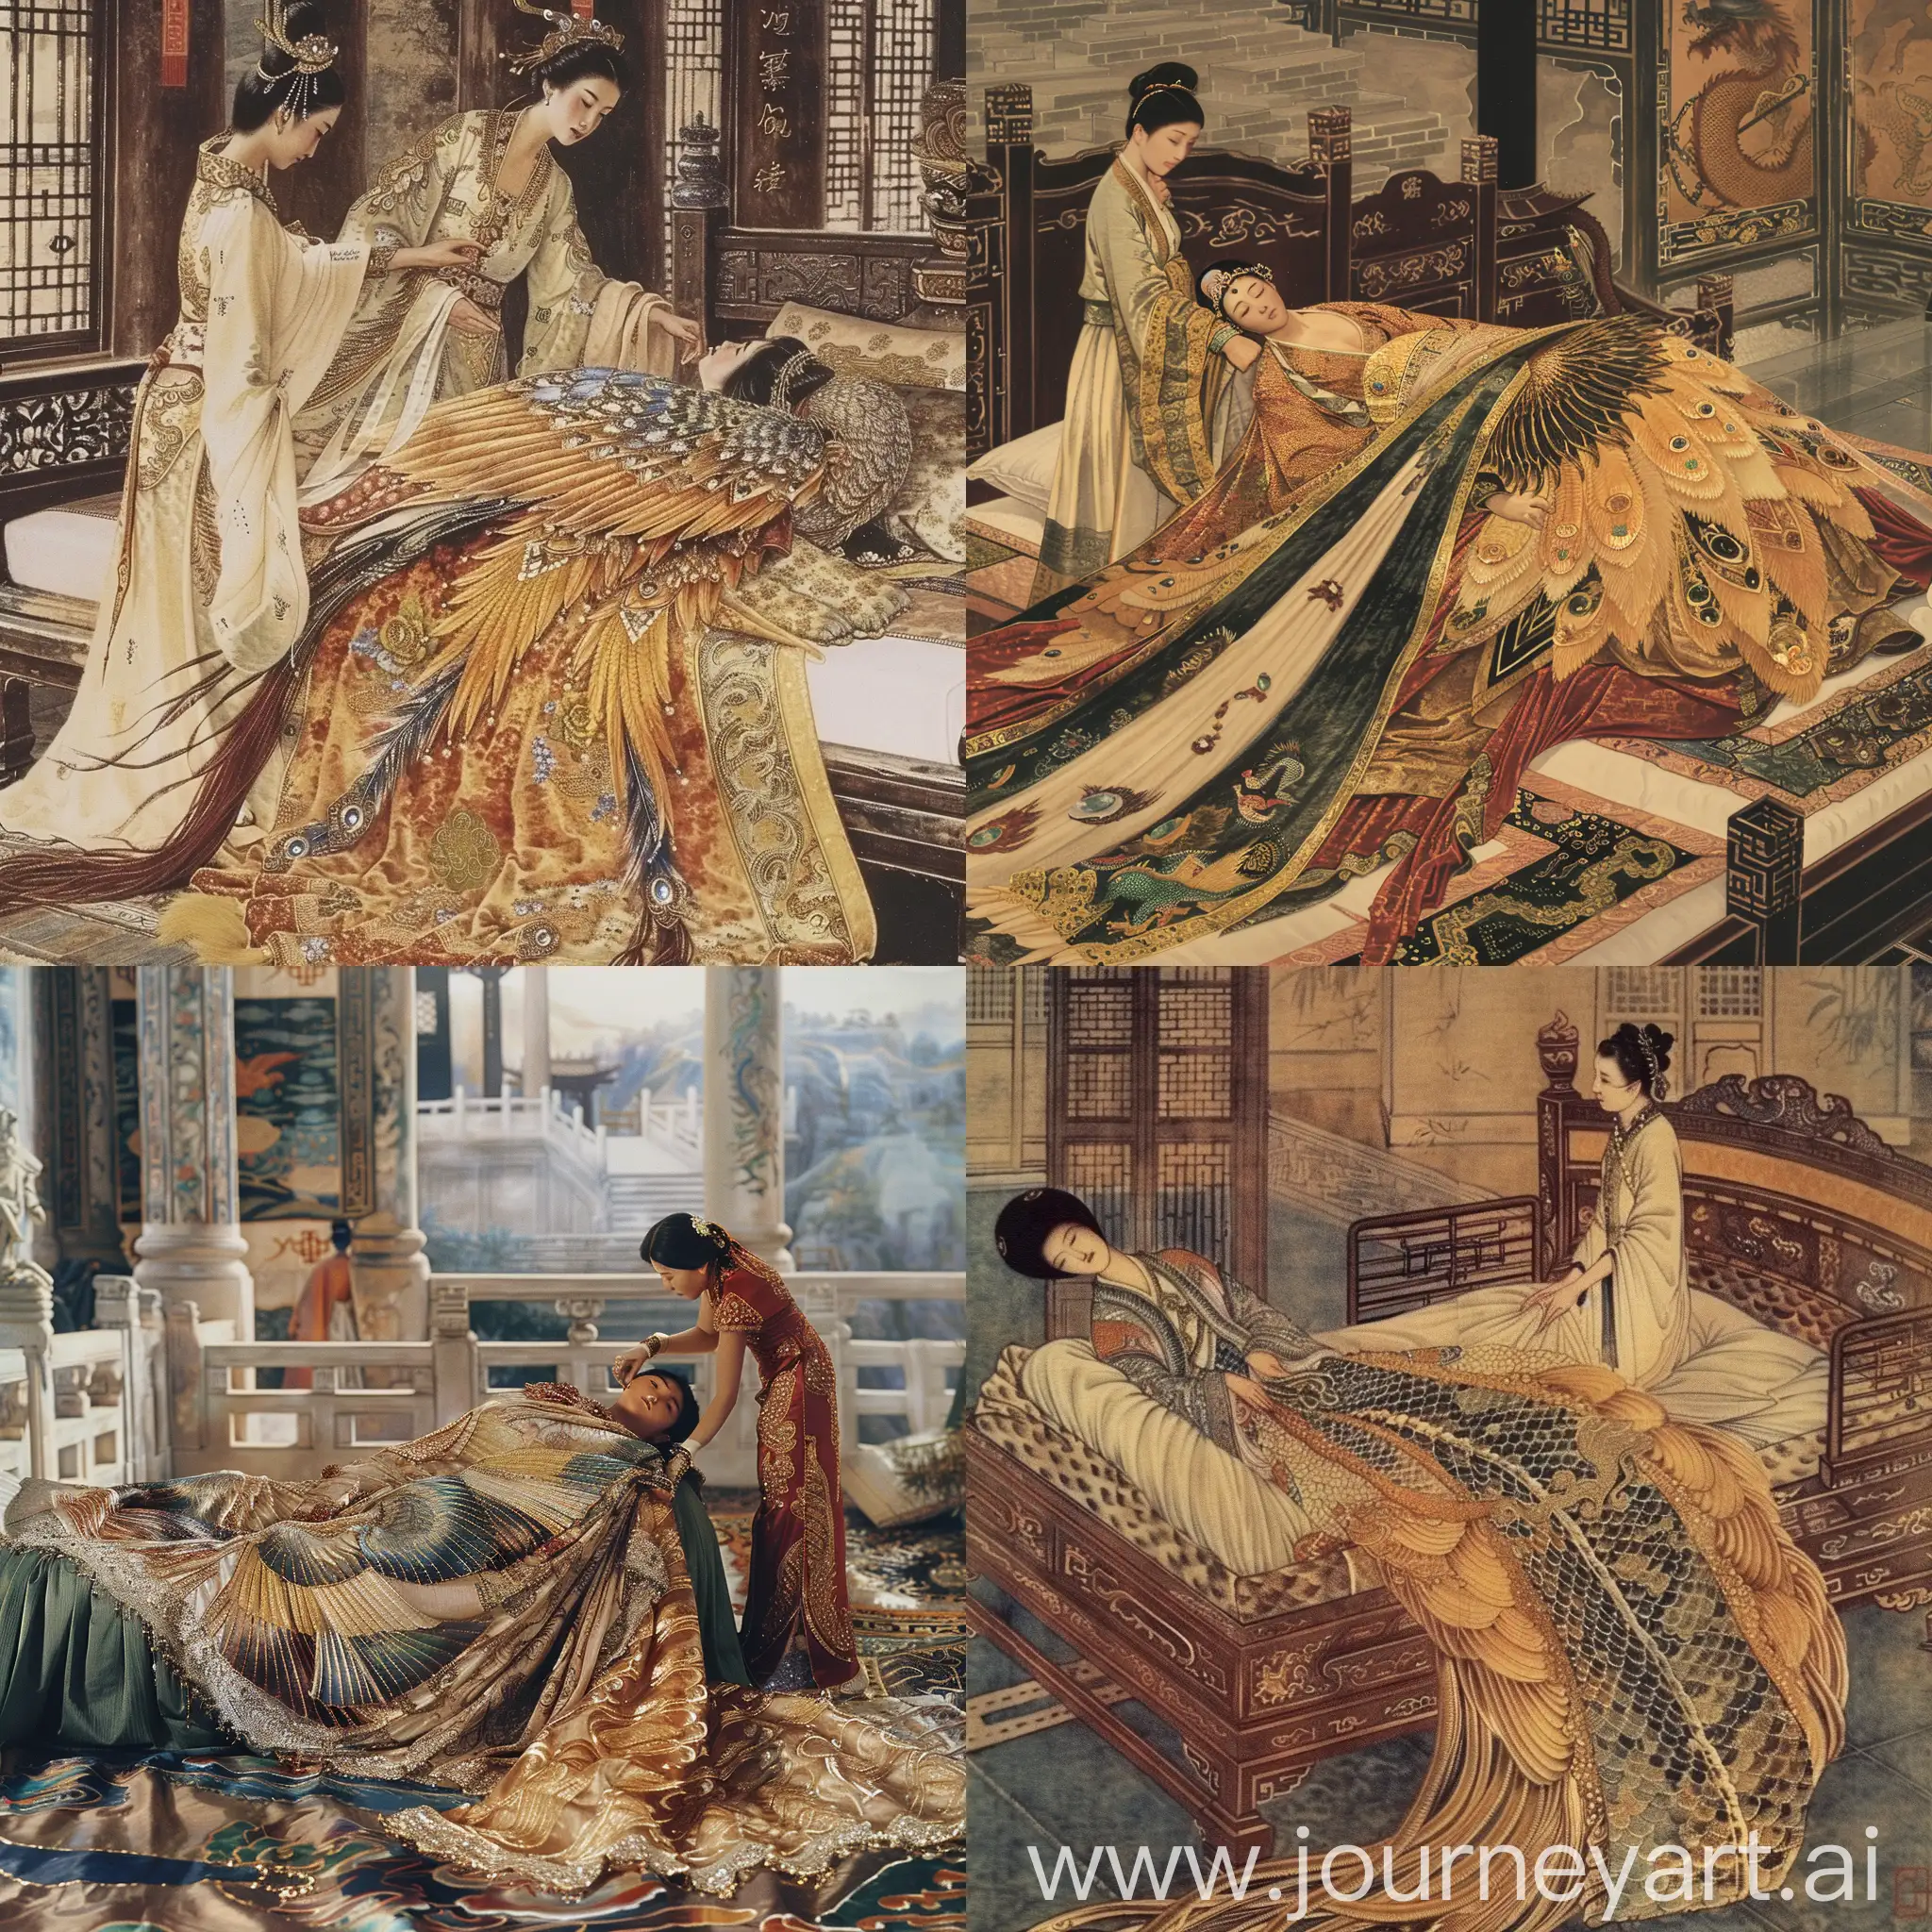 Ancient-Empress-Wu-Zetian-Assisted-by-Maid-in-Magnificent-Palace-Bedchamber